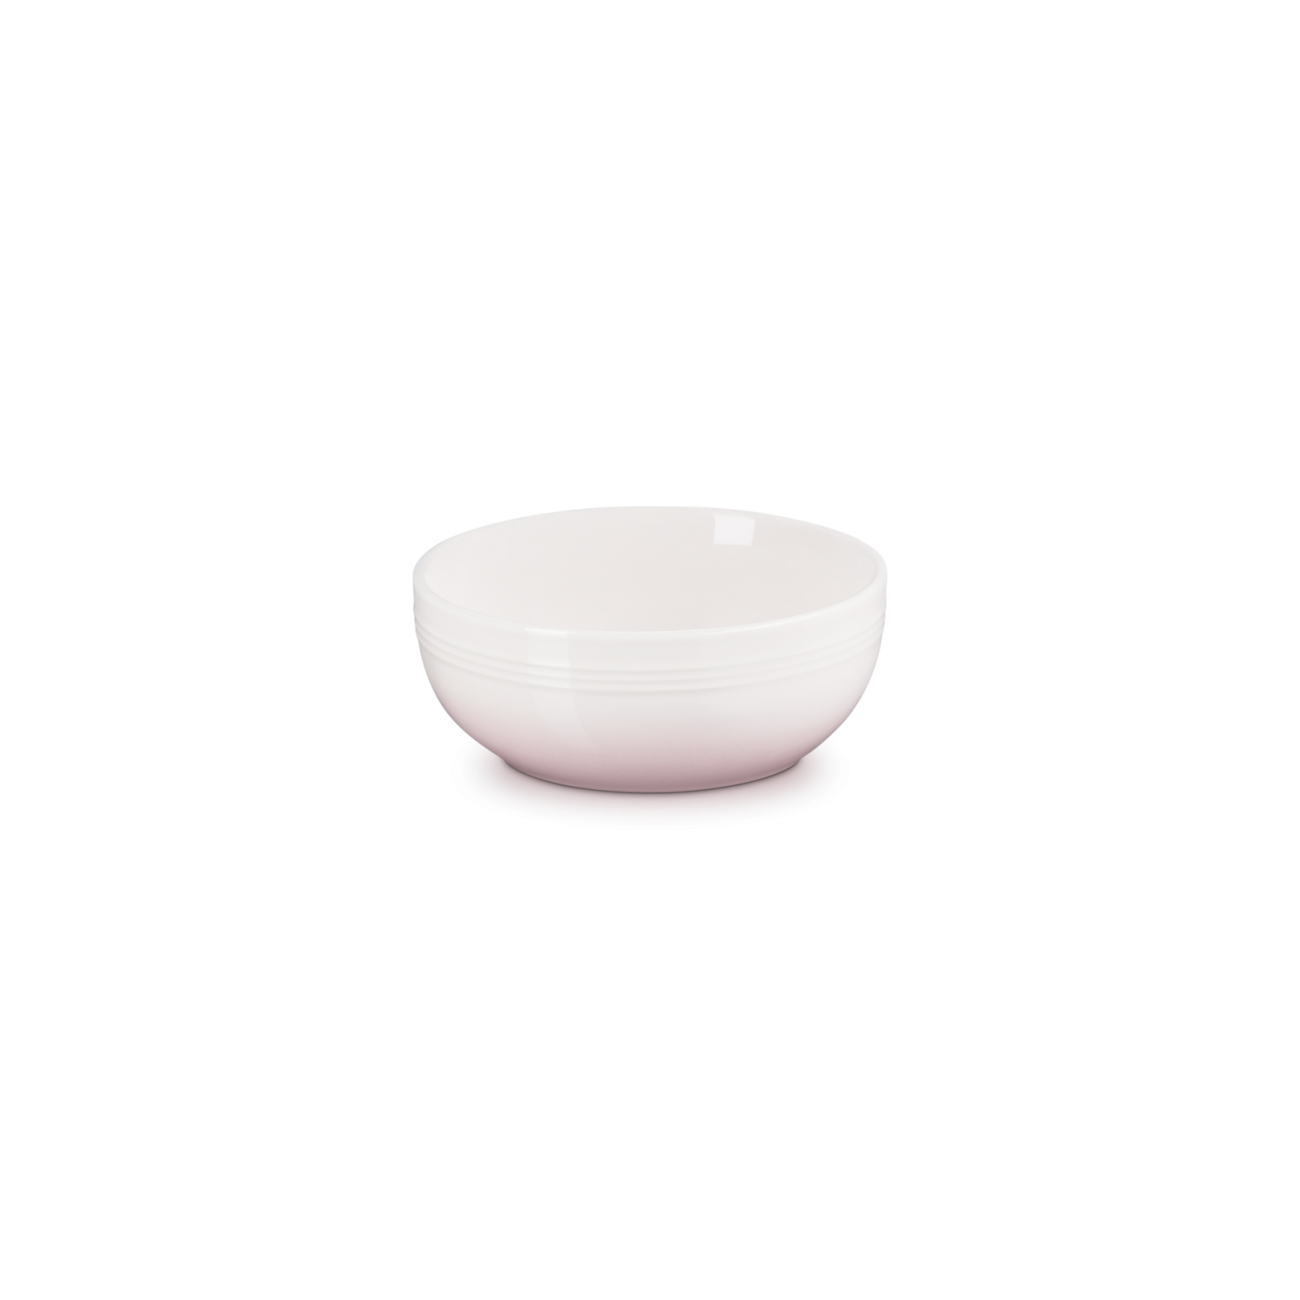 https://www.tattahome.com/121150-large_default/le-creuset-coupe-cereal-bowl-shell-pink.jpg